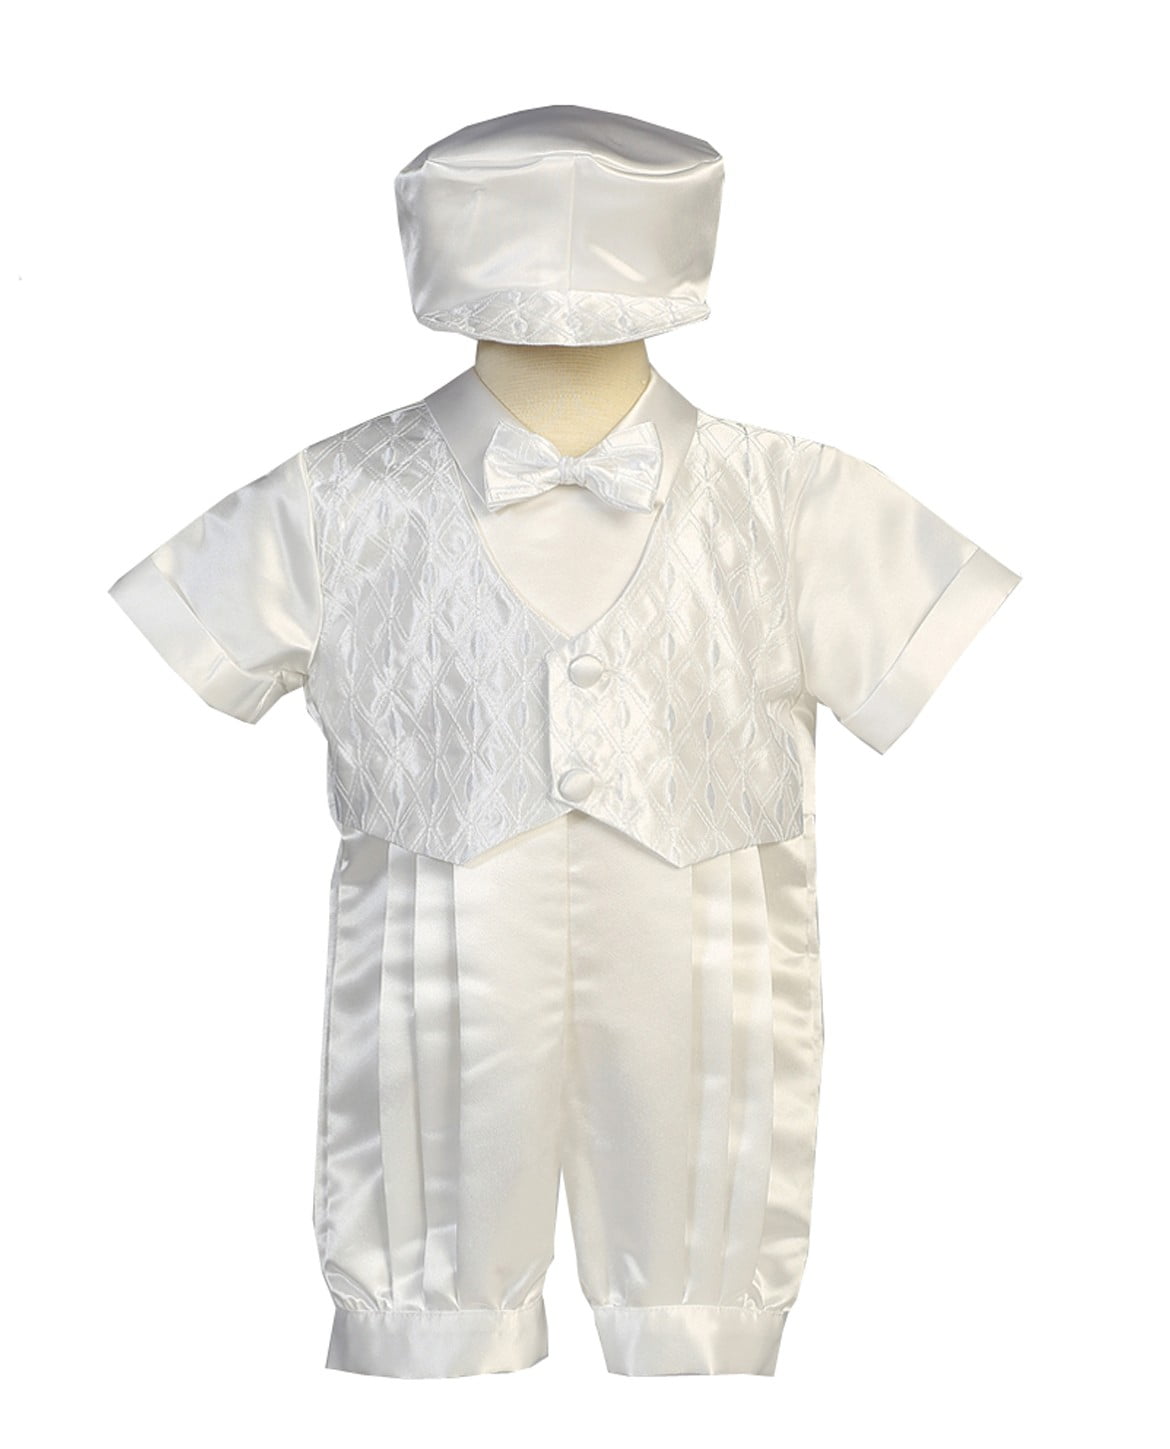 Baby Boys White Satin Christening Suit Romper Set Hat Shoes 0 3 6 9 12 Months 